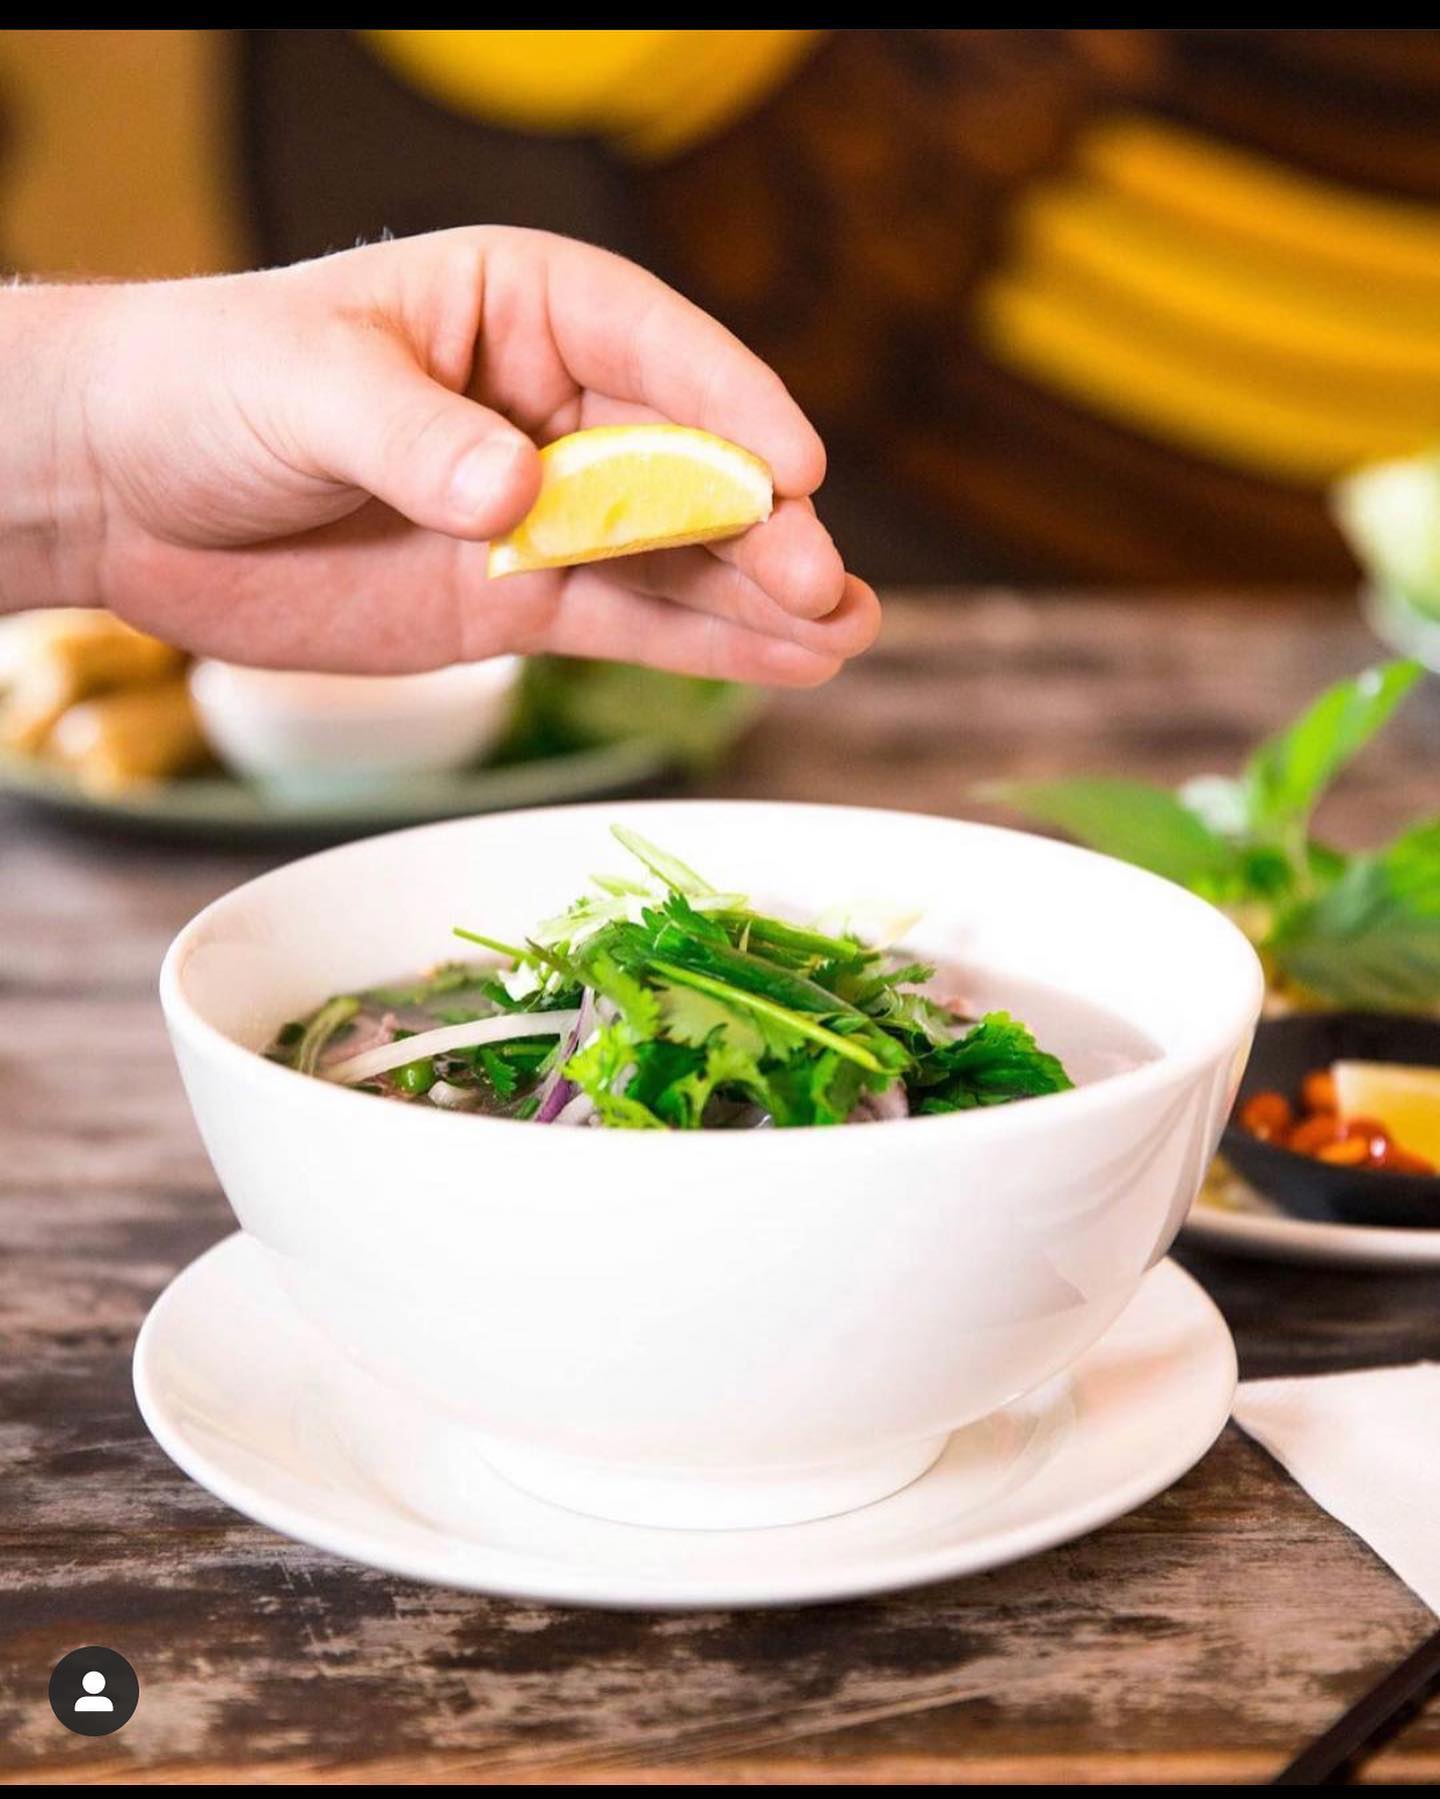 Keep yourself warm with one of our Vietnamese noodle soup bowls. 😊 
Available for our takeaway guests too. Order now via our website hanoirose.com.au or via one of our delivery partners for delivery or you can pay us a visit. 😉

#pho #ilovepho #vietnamesefood #vietnamesecuisine #vegan #meatlovers #glutenfree #brunswick #sydneyroad #melbrestaurant